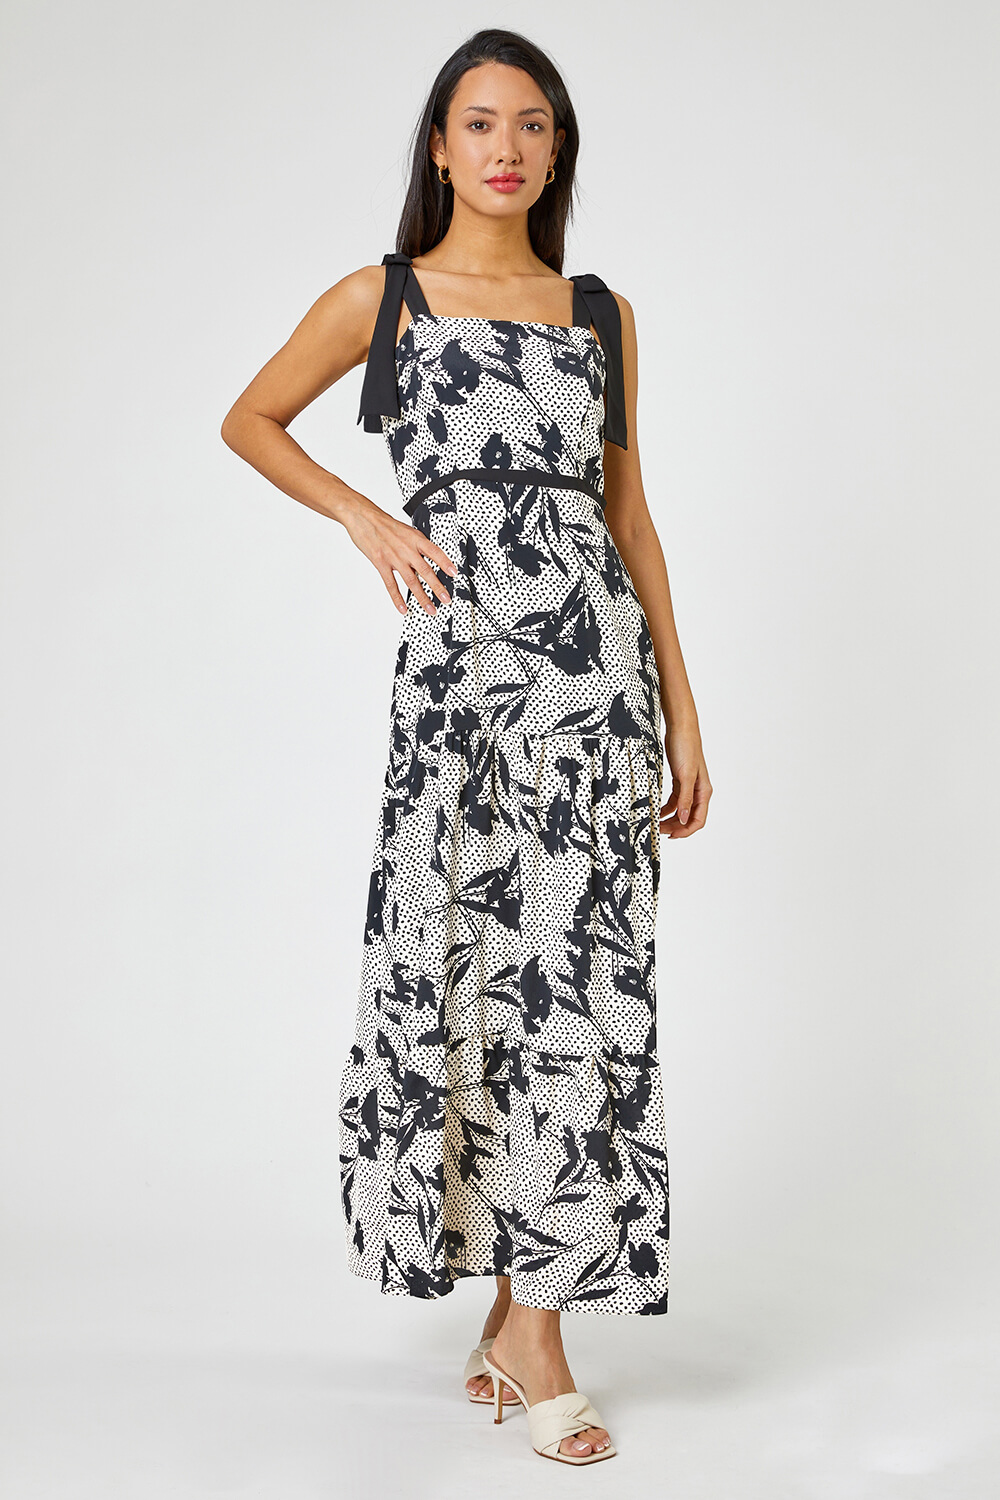 Cream  Tiered Contrast Spot Floral Print Maxi Dress, Image 4 of 5